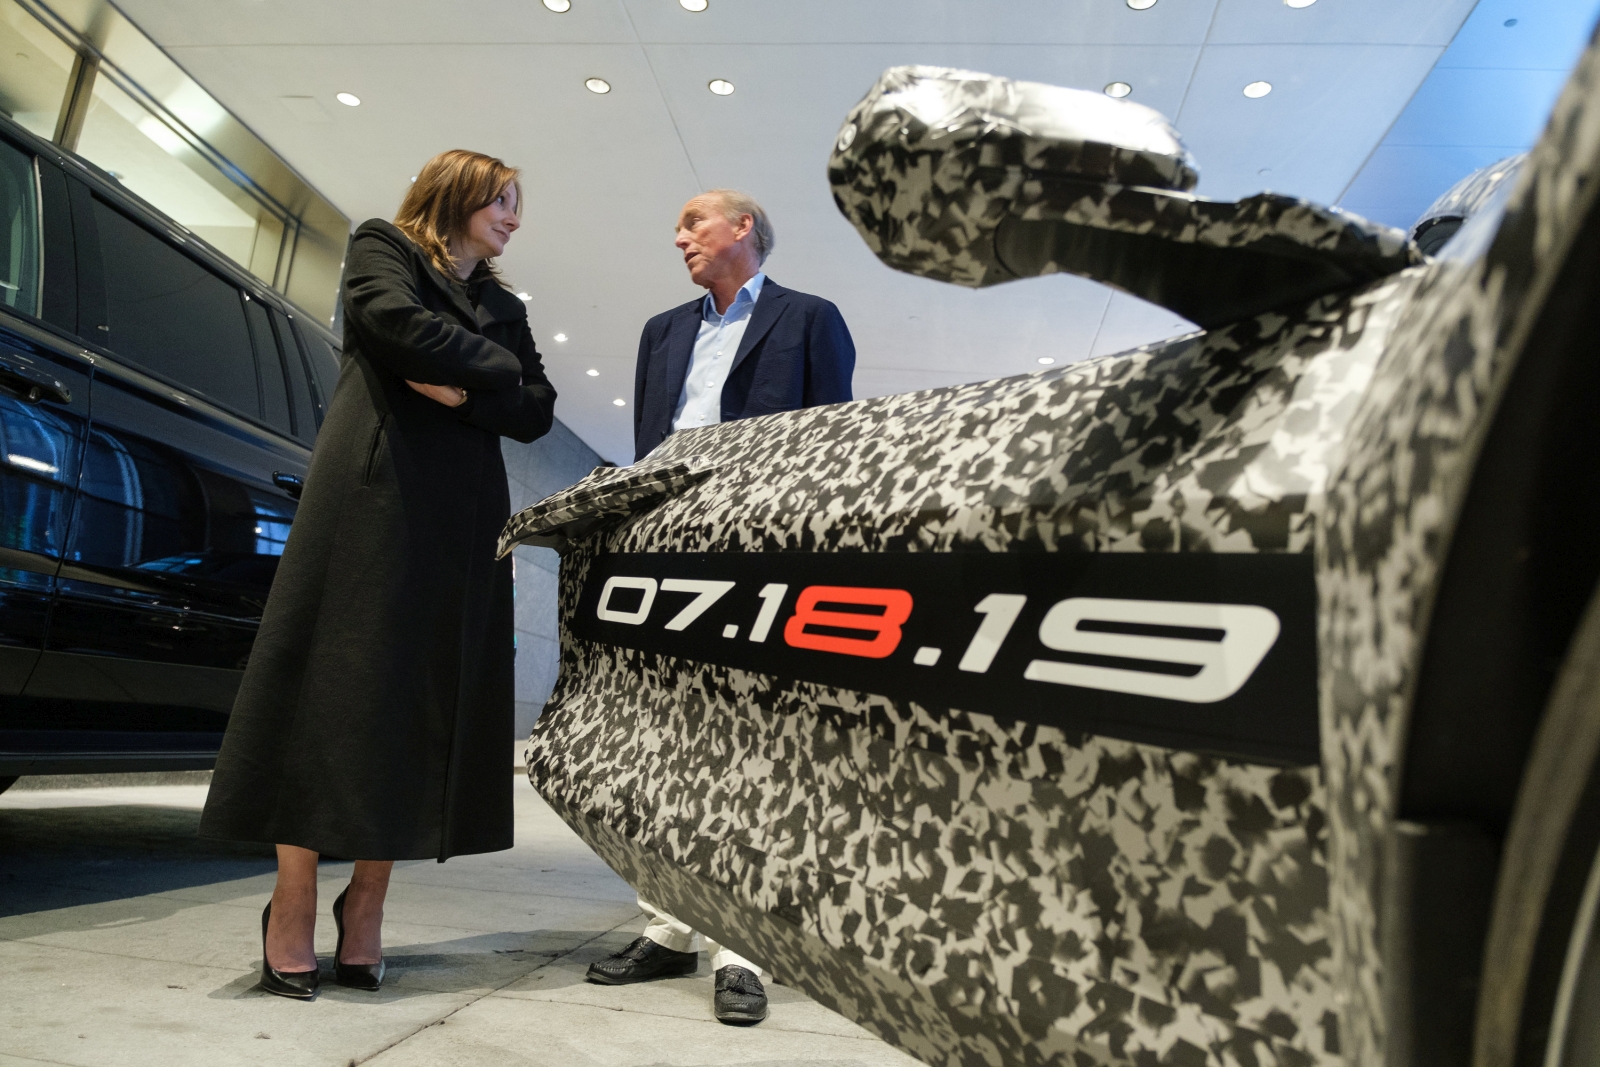 General Motors Chairman and CEO Mary Barra and a camouflaged next generation Chevrolet Corvette Thursday, April 11, 2019 in New York, New York. The next generation Corvette will be unveiled on July 18. (Photo by Todd Plitt for Chevrolet)